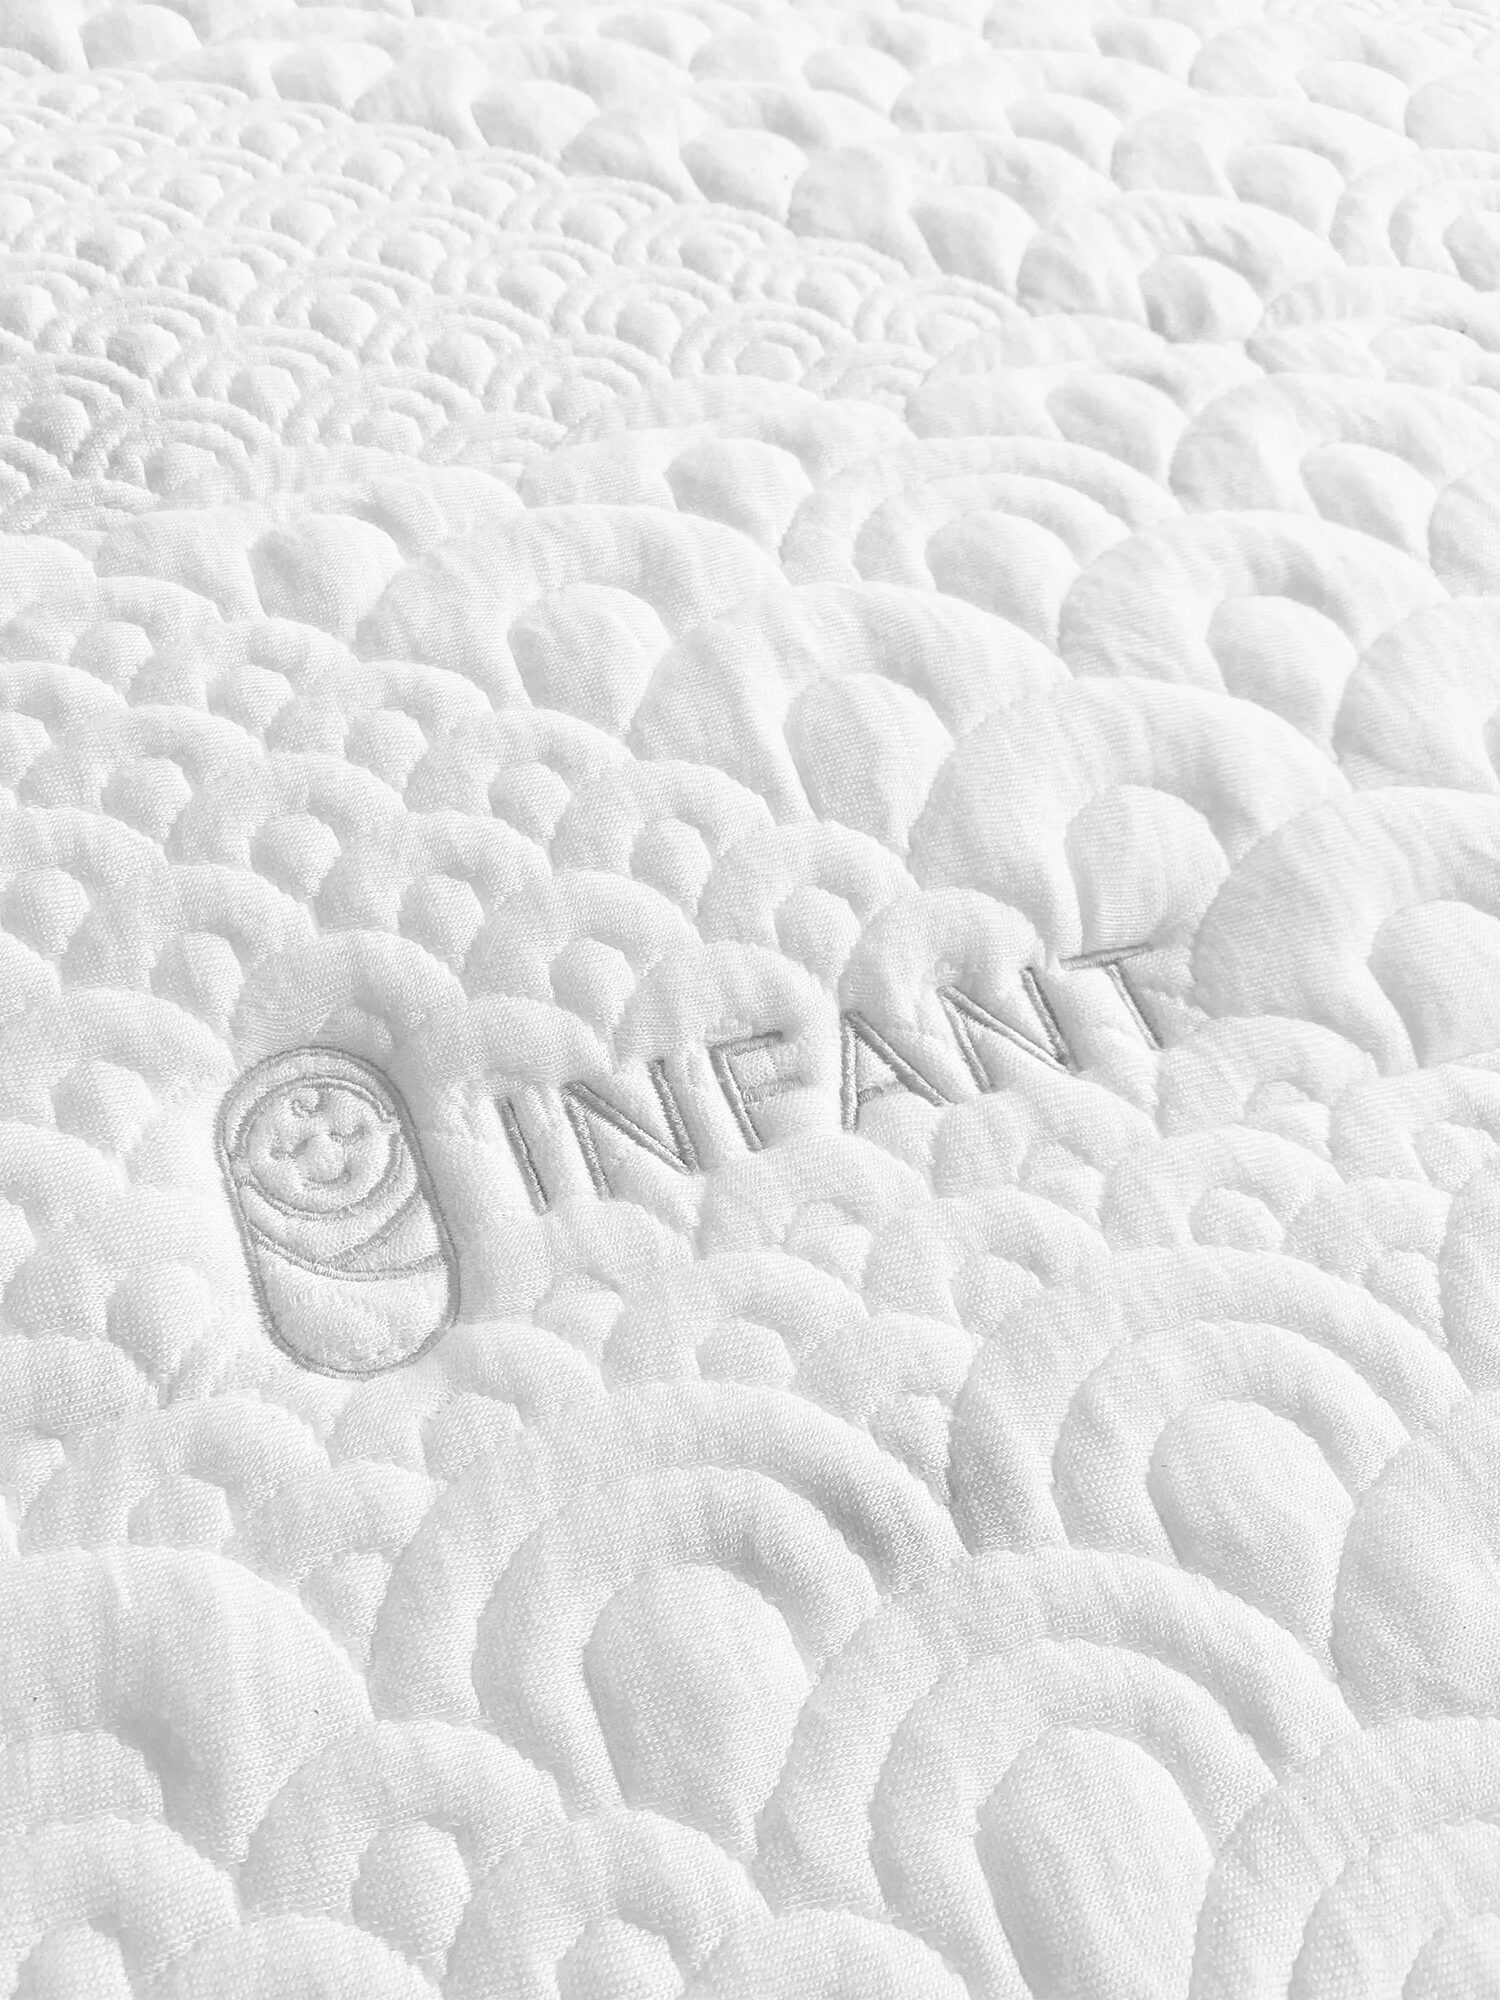 A white quilted mattress cover